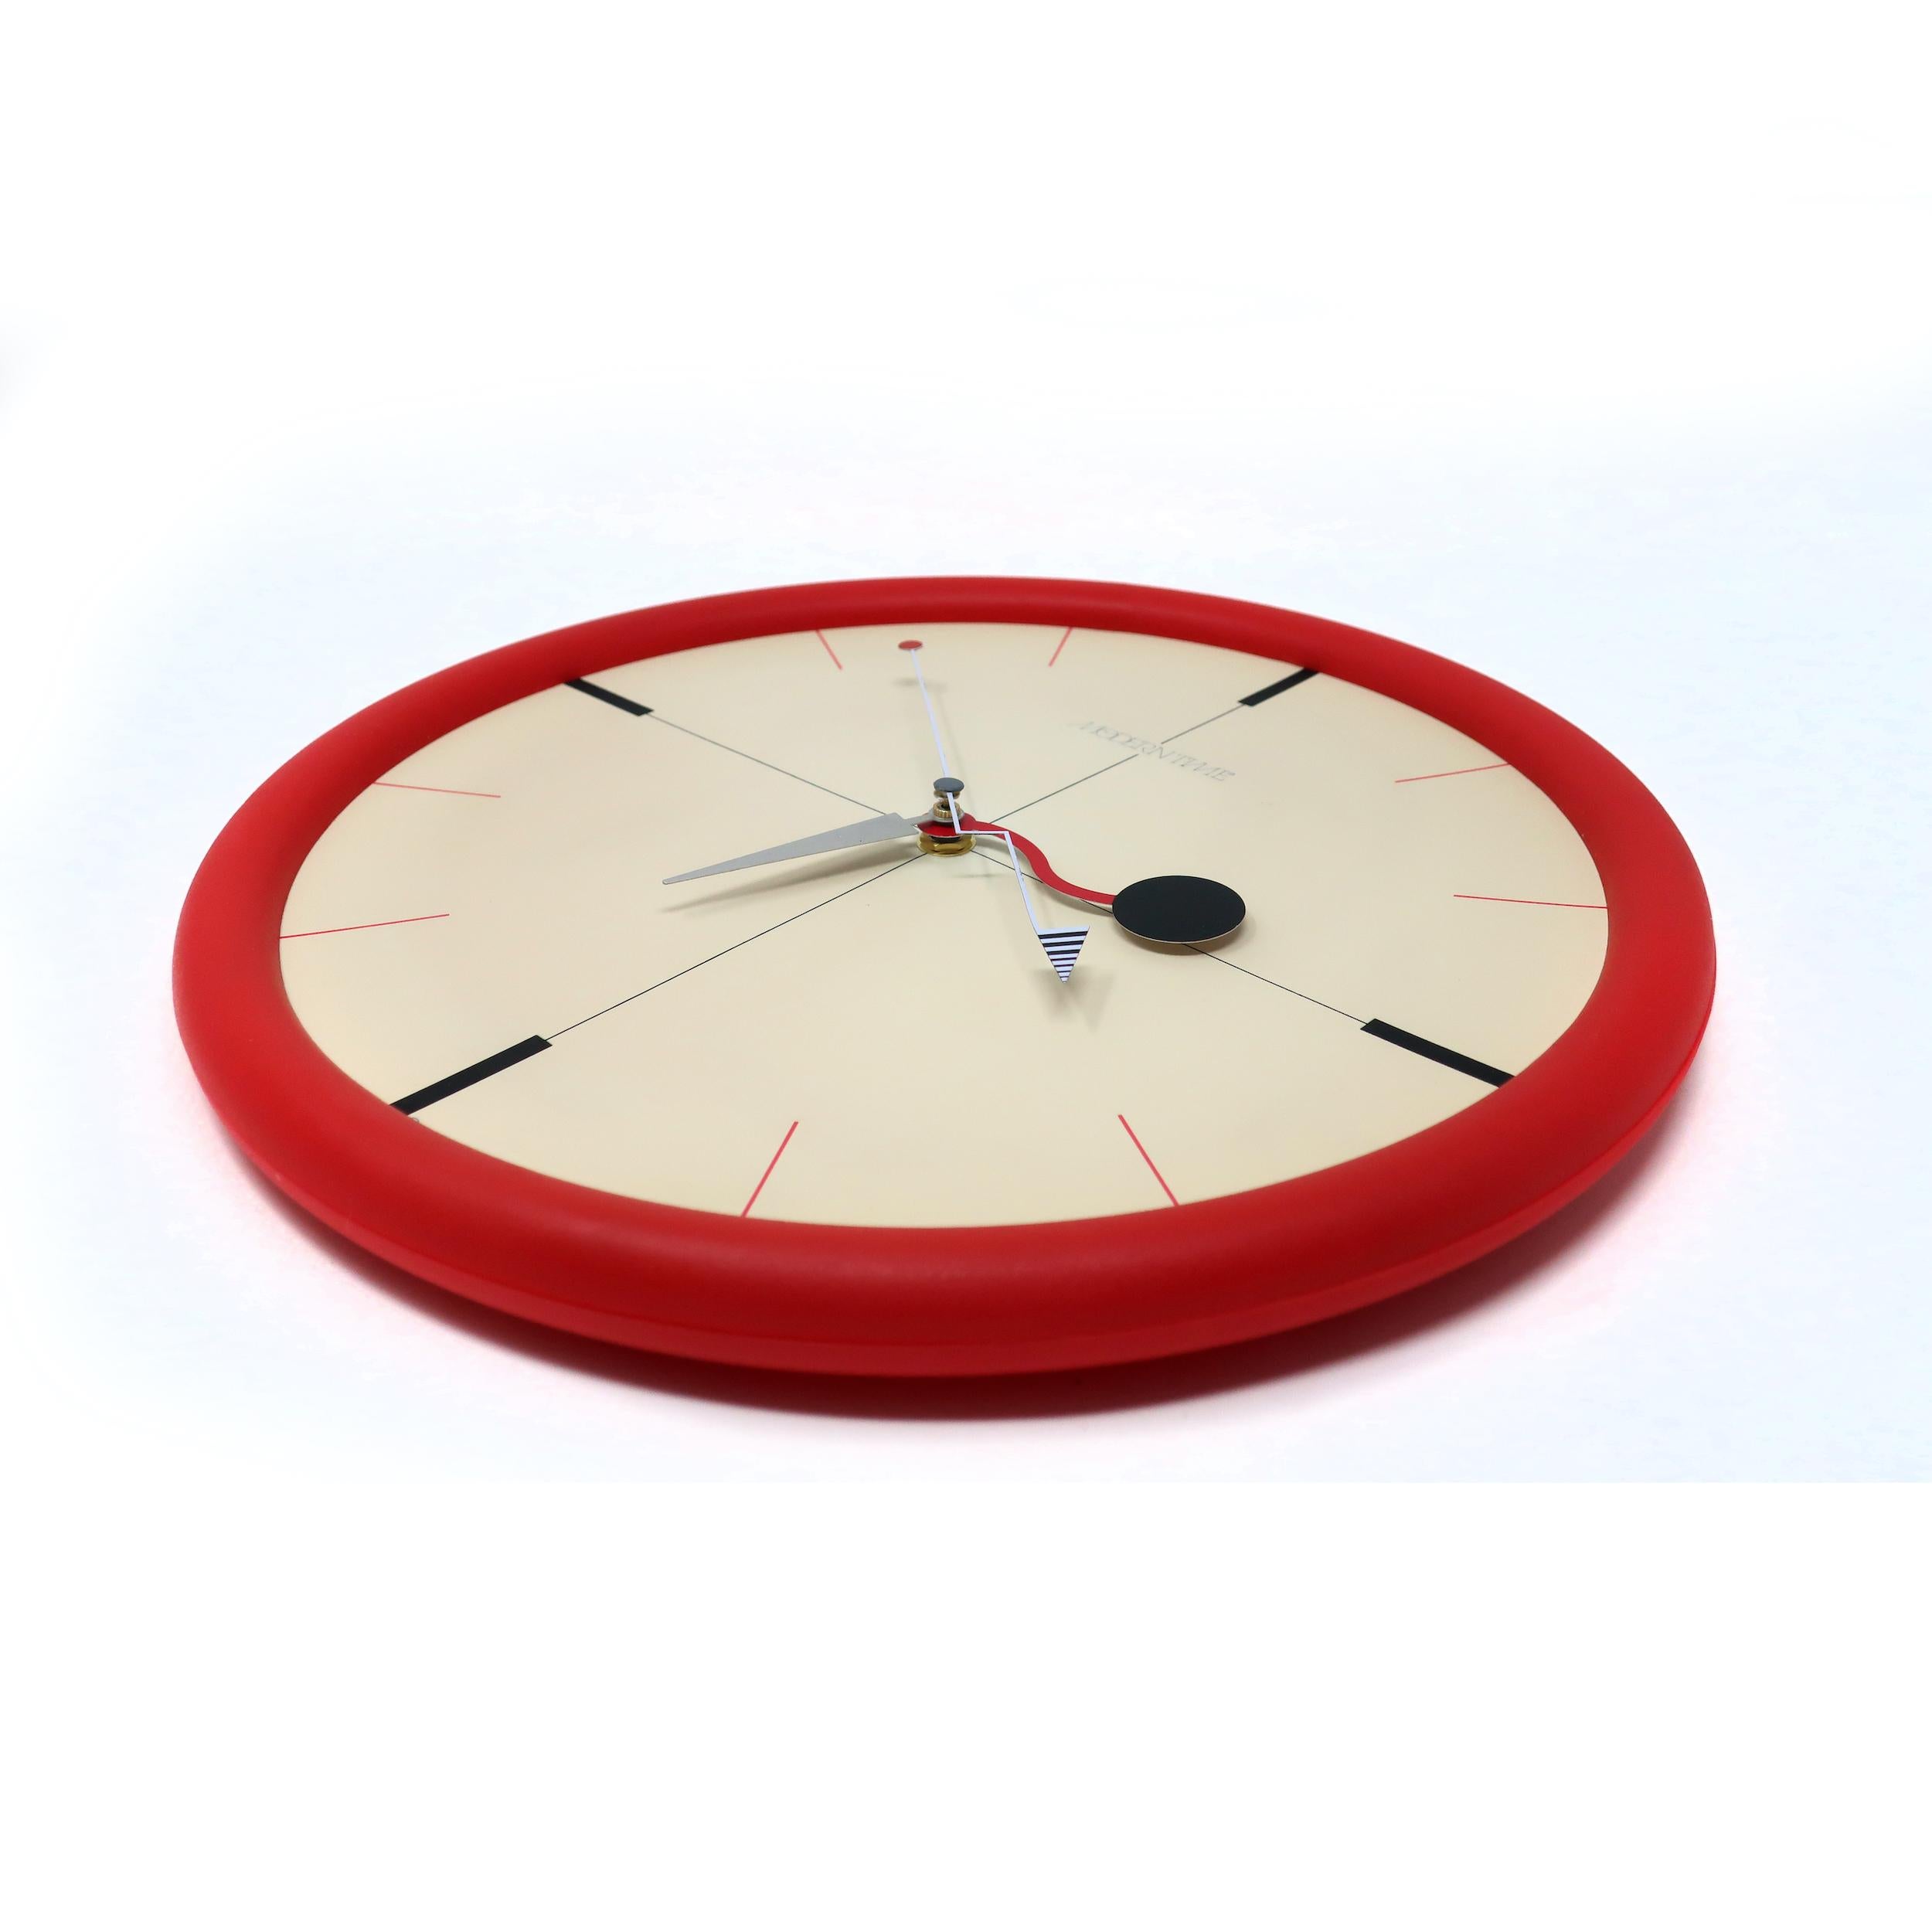 A stunning postmodern wall clock with multi-color accents from Canetti's Moderntime Collection. Red plastic frame, white face, and red, black, and gray accents. It perfectly walks a line between understated & sophisticated and bright &